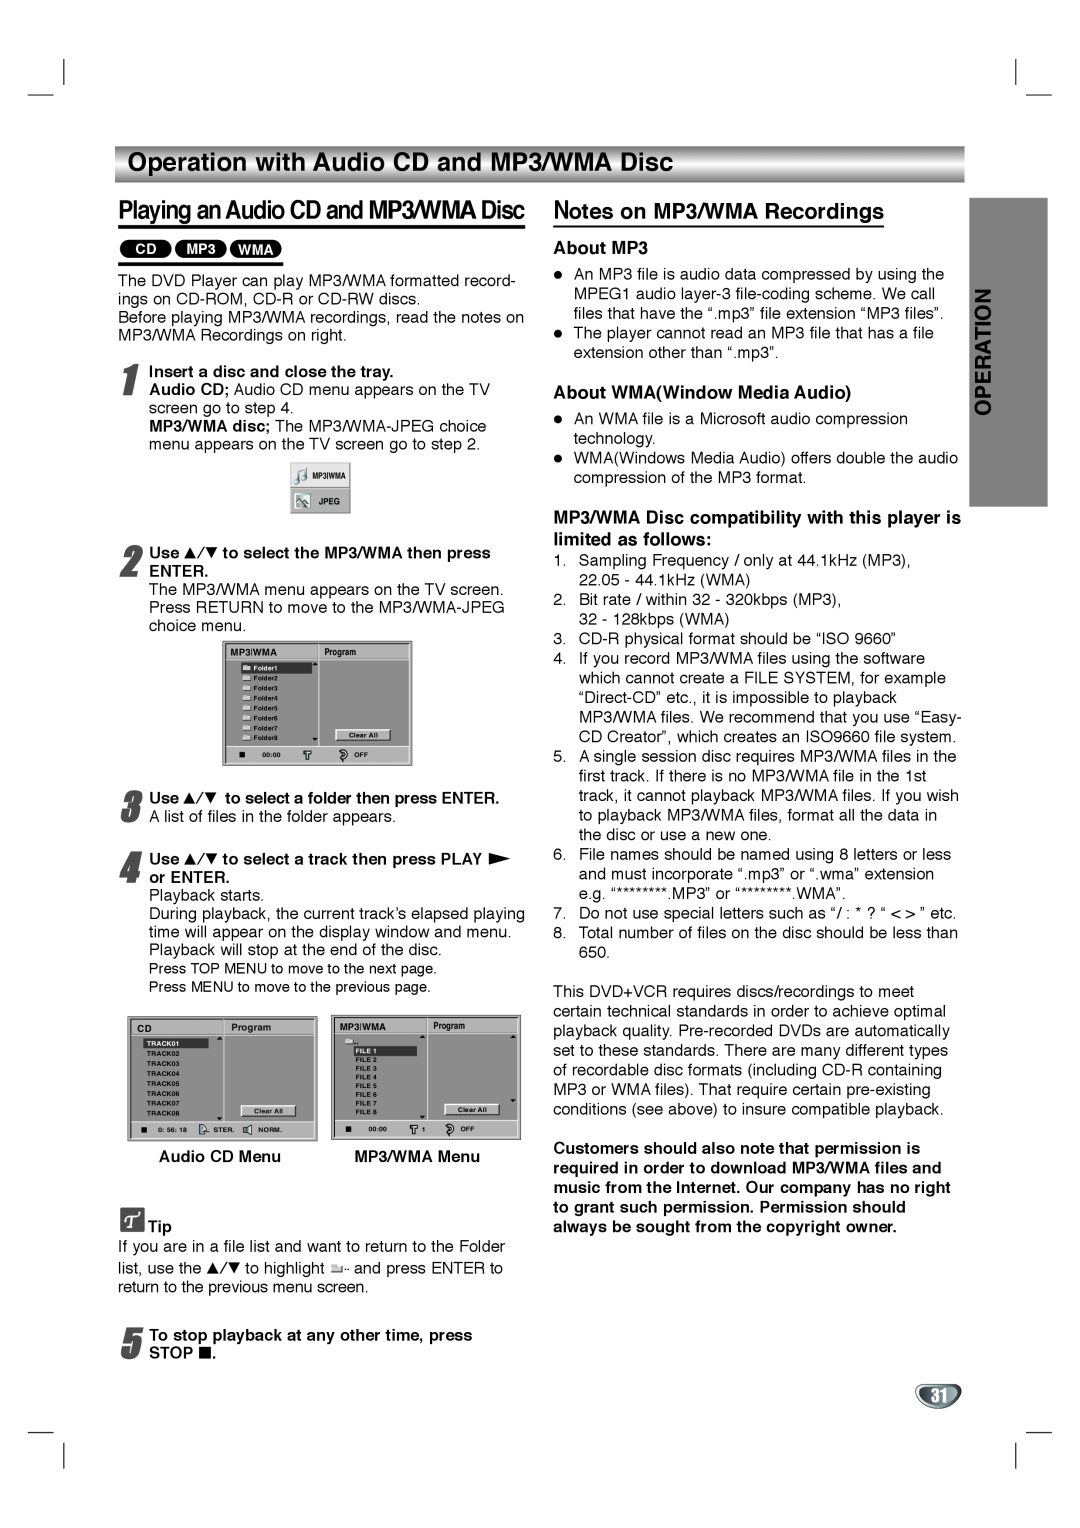 Toshiba SD-K530SU owner manual Operation with Audio CD and MP3/WMA Disc, Playing an Audio CD and MP3/WMA Disc, About MP3 